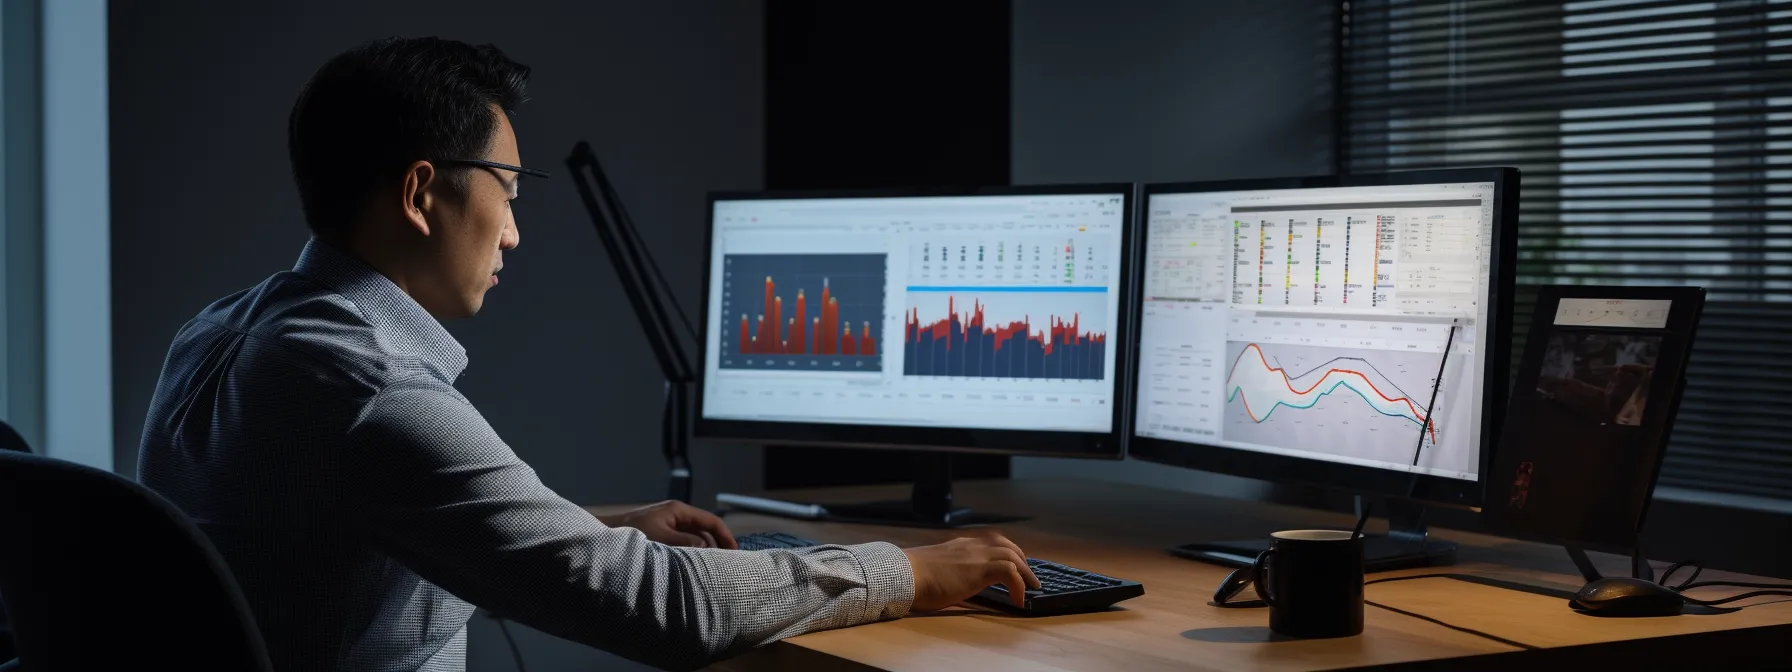 an seo specialist analyzing data on a computer screen with graphs and charts.